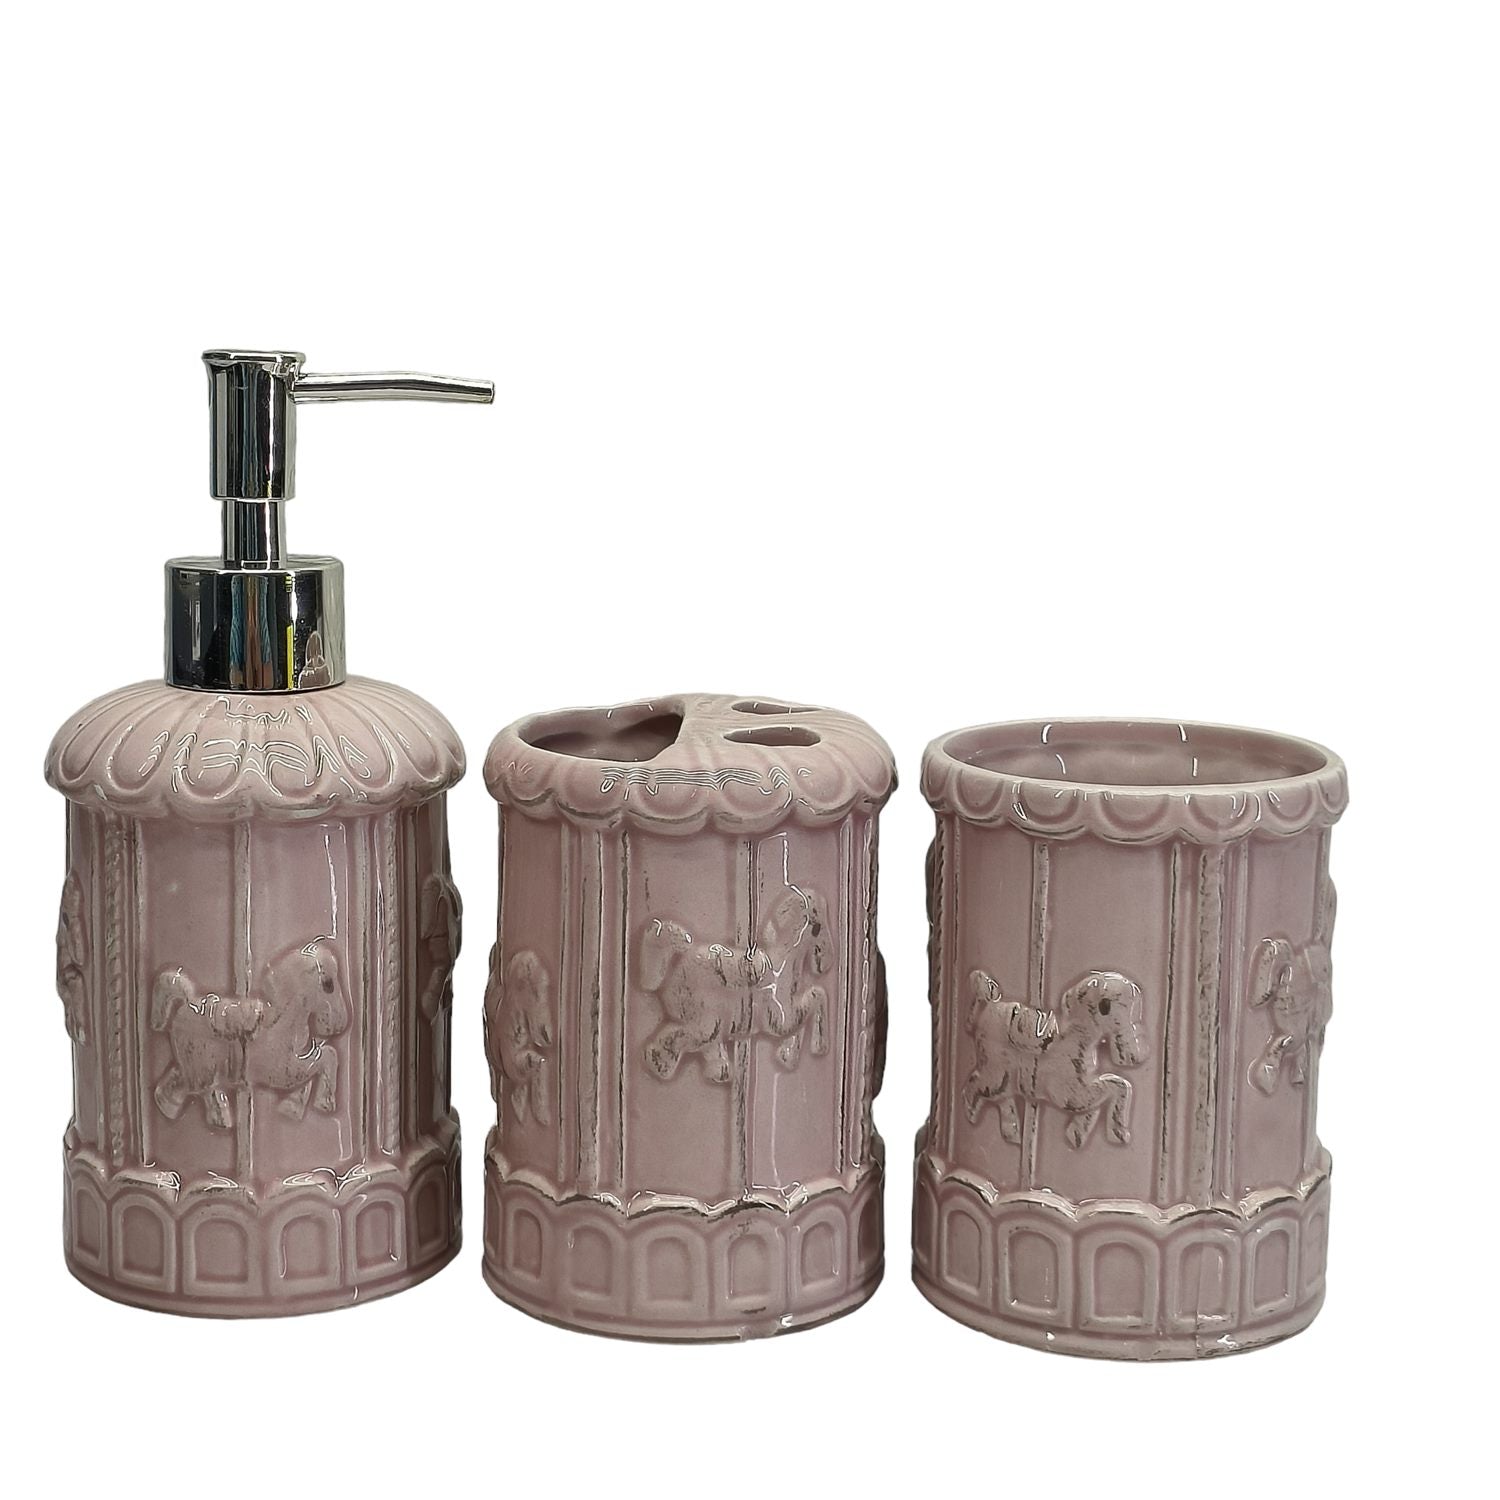 Ceramic Soap Dispenser Set with Toothbrush Holder and Tumbler, Set of 3 Bathroom Accessories for Home (C3062)